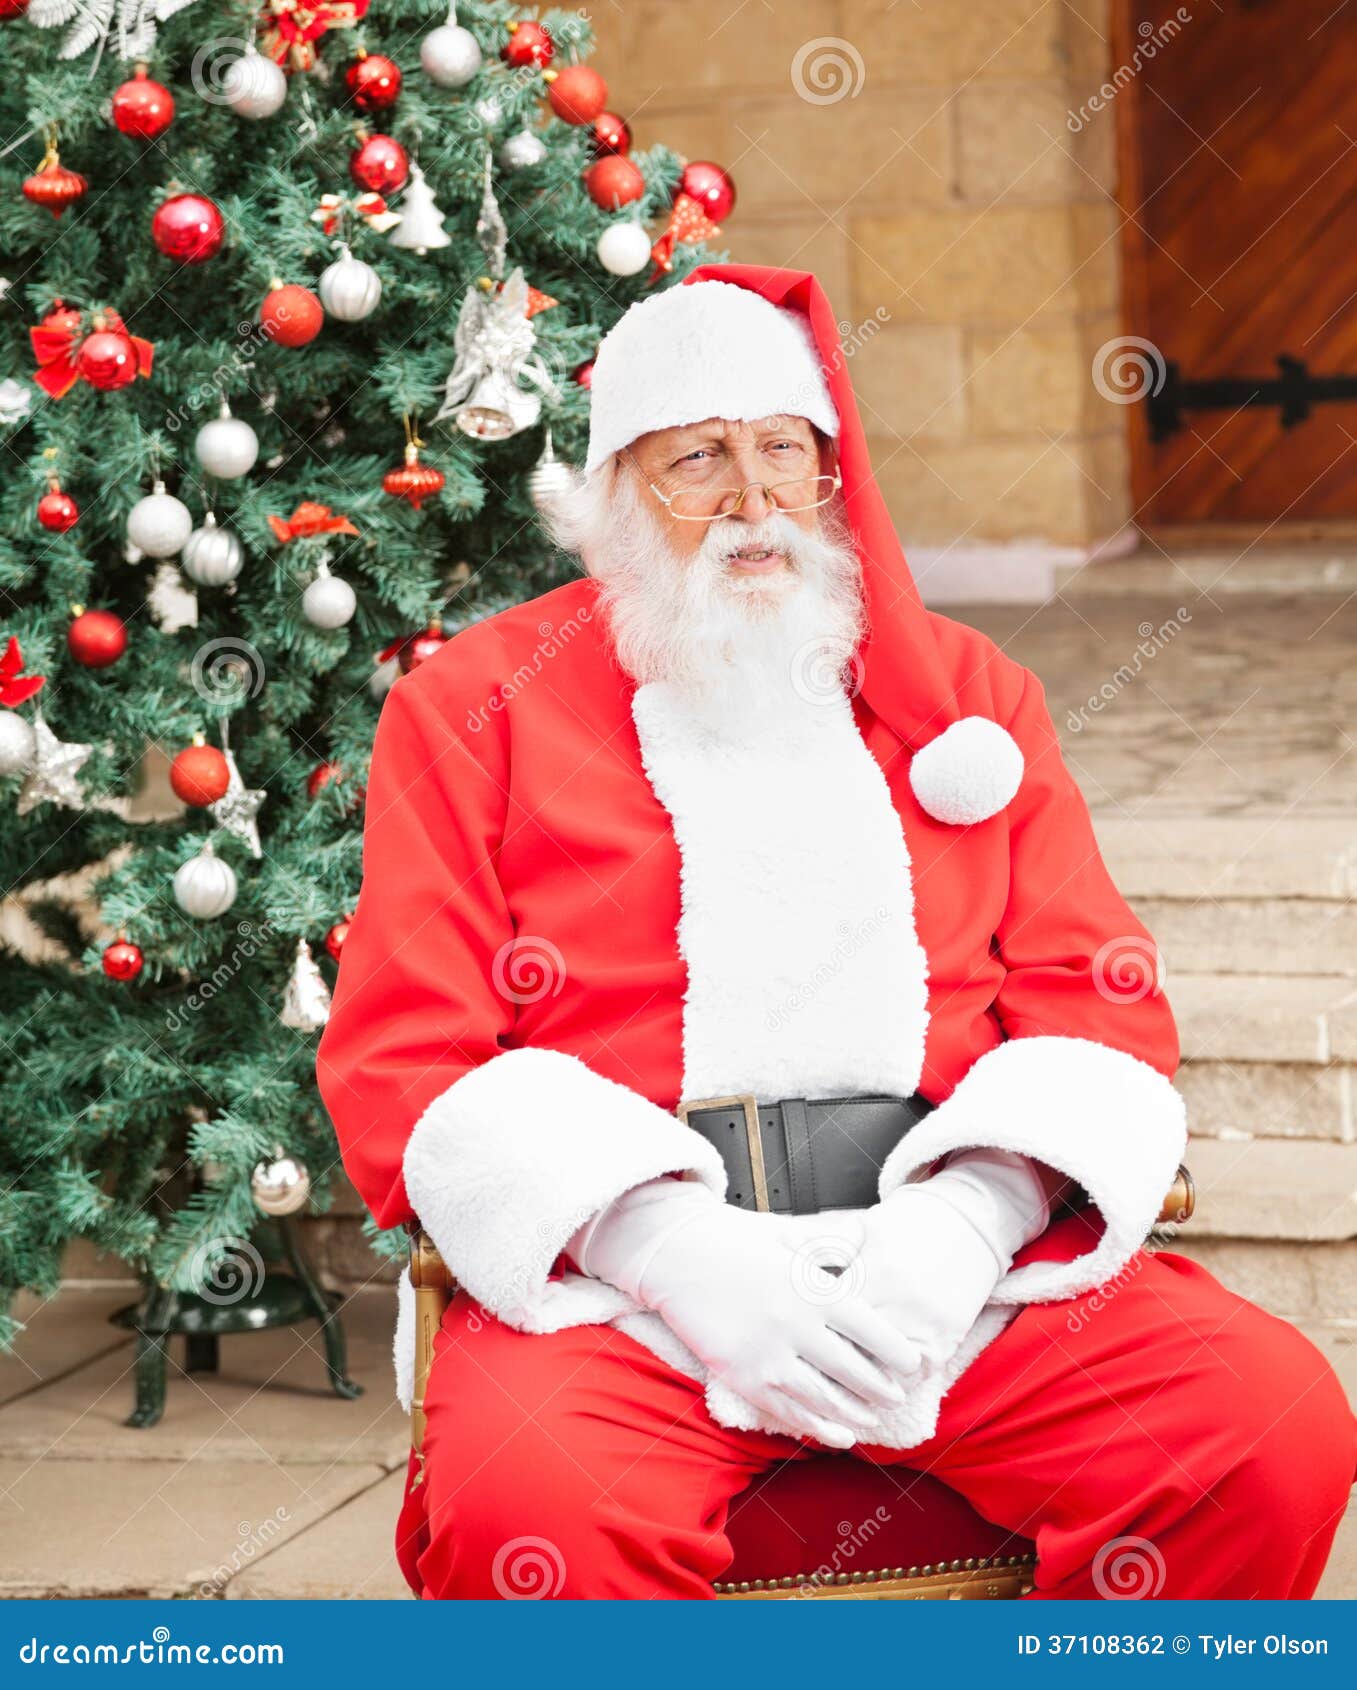 List 95+ Images picture of santa in front of your tree Updated